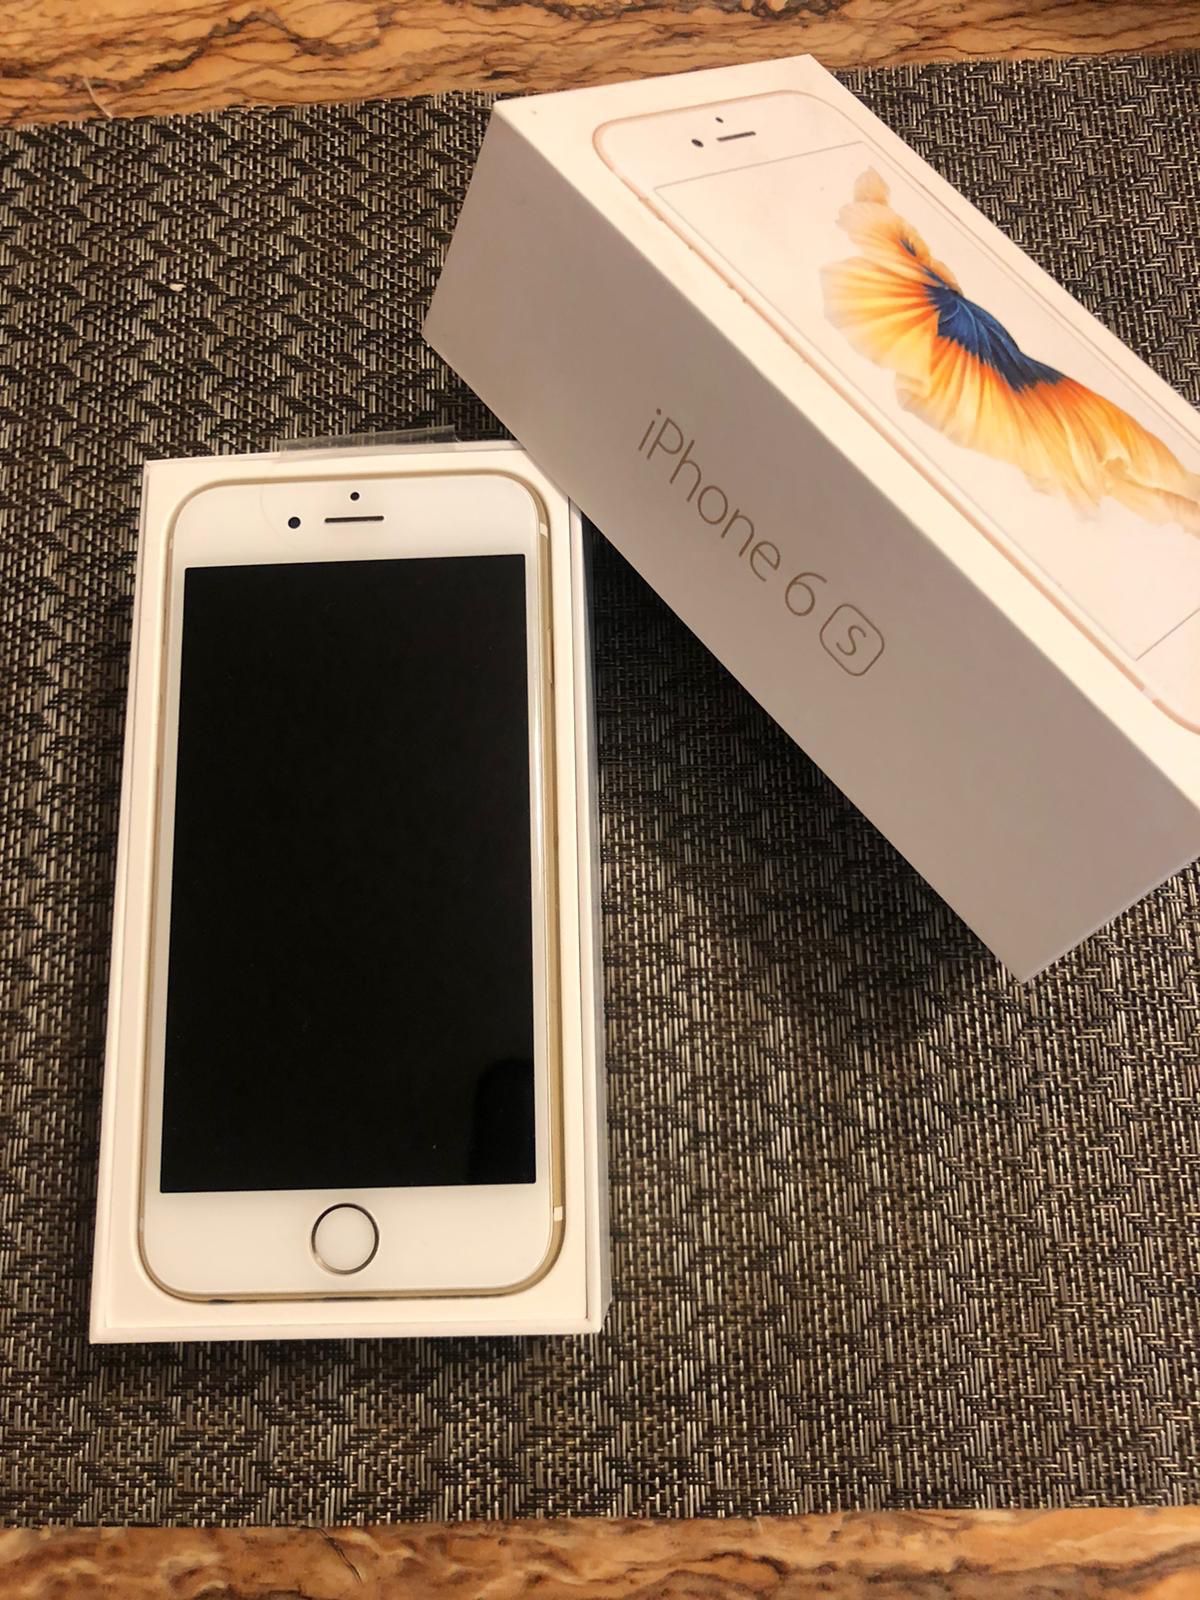 iPhone 6s 64gb unlocked Gold excellent condition